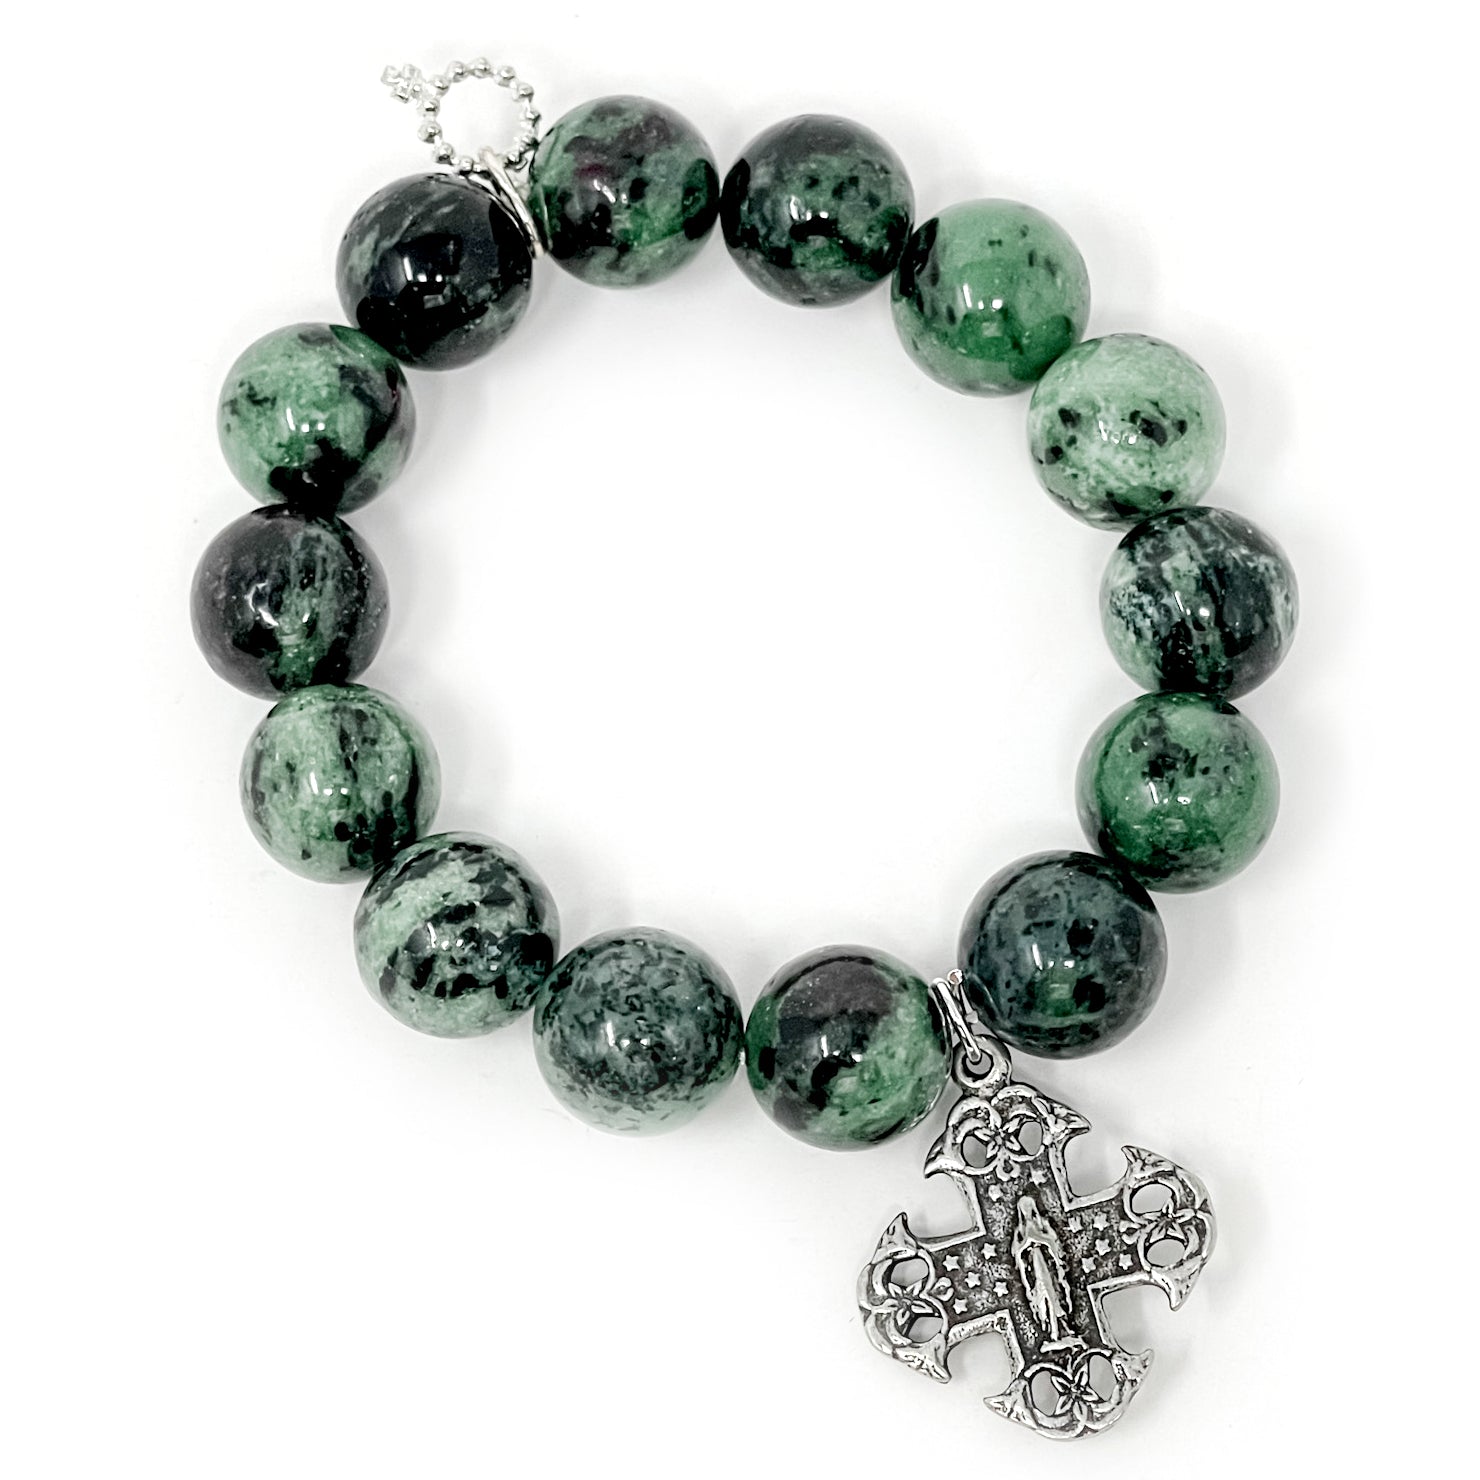 PowerBeads by jen Jewelry Average 7" O'Malley Jasper with Antiqued Notre Dame Cross